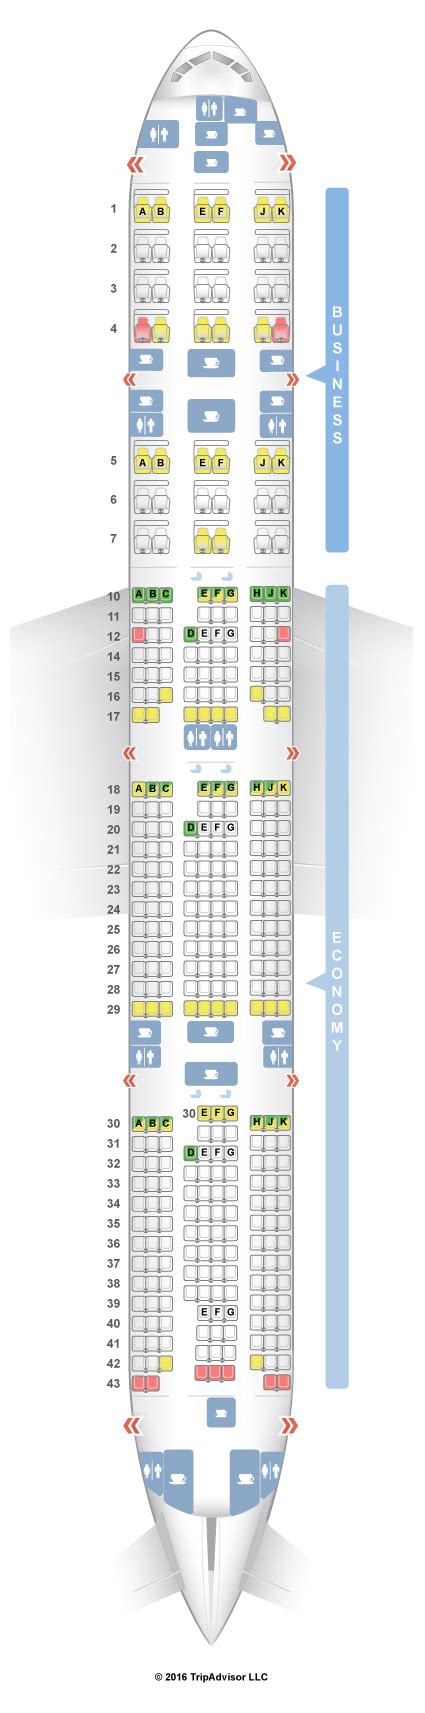 Seat map for qatar airways. For your next Qatar Airways flight, use this seating chart to get the most comfortable seats, legroom, and recline on . Seat Maps; Airlines; Cheap Flights; Comparison Charts. Short-haul Economy Class ... Qatar Airways Seat Maps. Overview; Planes & Seat Maps. Airbus A319 (319) Business; Airbus A319-133LR (319) Airbus A320 (320) Layout 1; 